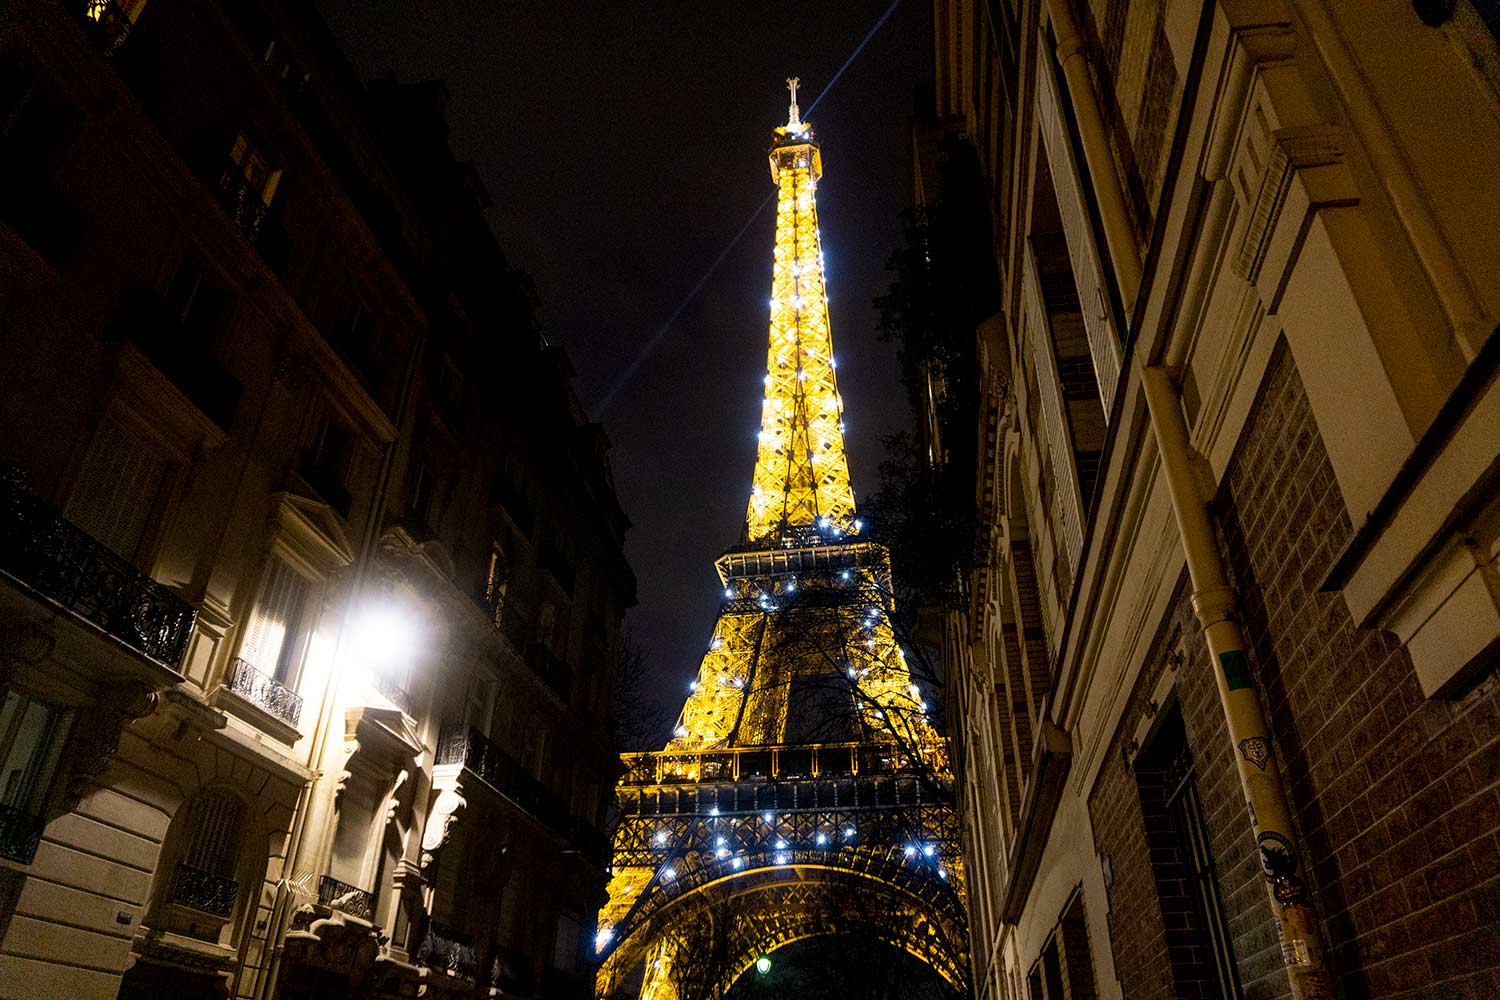 Night picture of the twinkling Eiffel Tower from a side street in Paris, France.